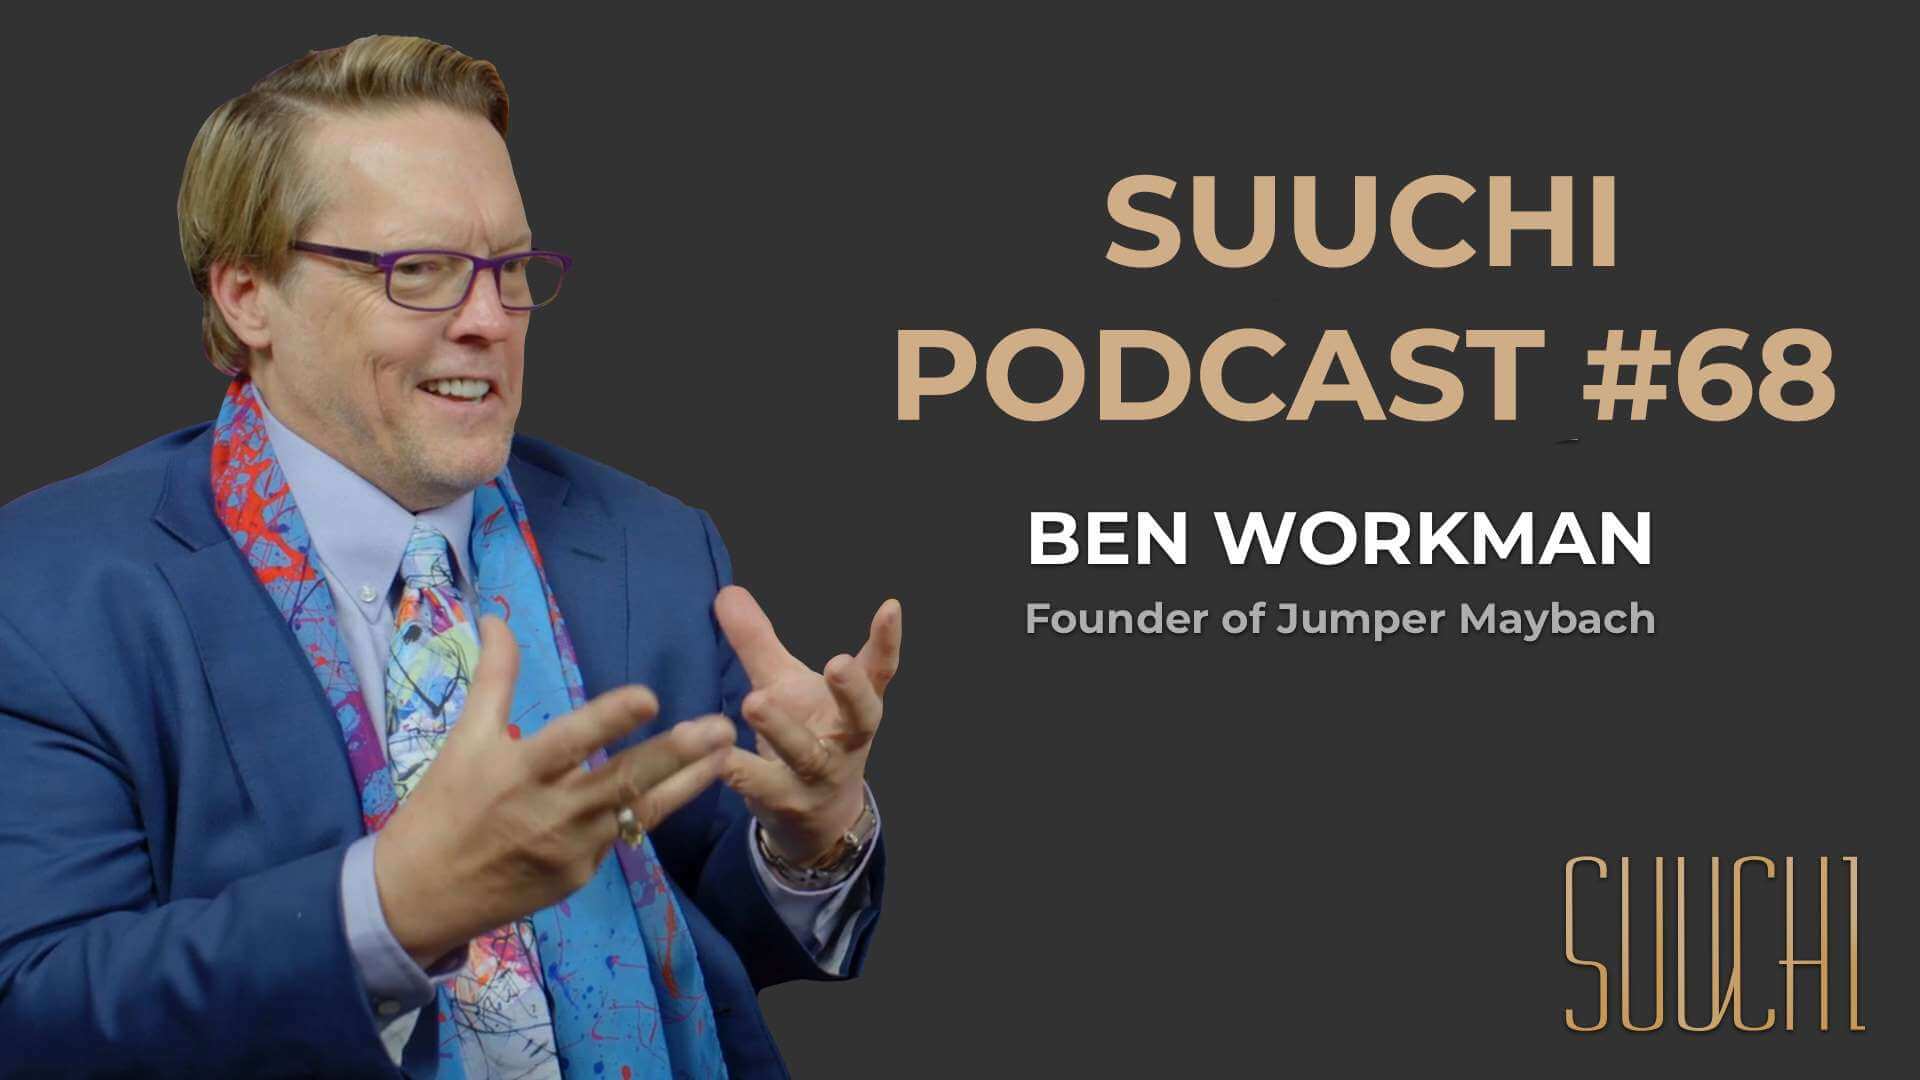 Suuchi Podcast #68: Ben Workman, Artist and Brand owner of Jumper Maybach, "From Harassed Employee to Artist & Brand Owner"